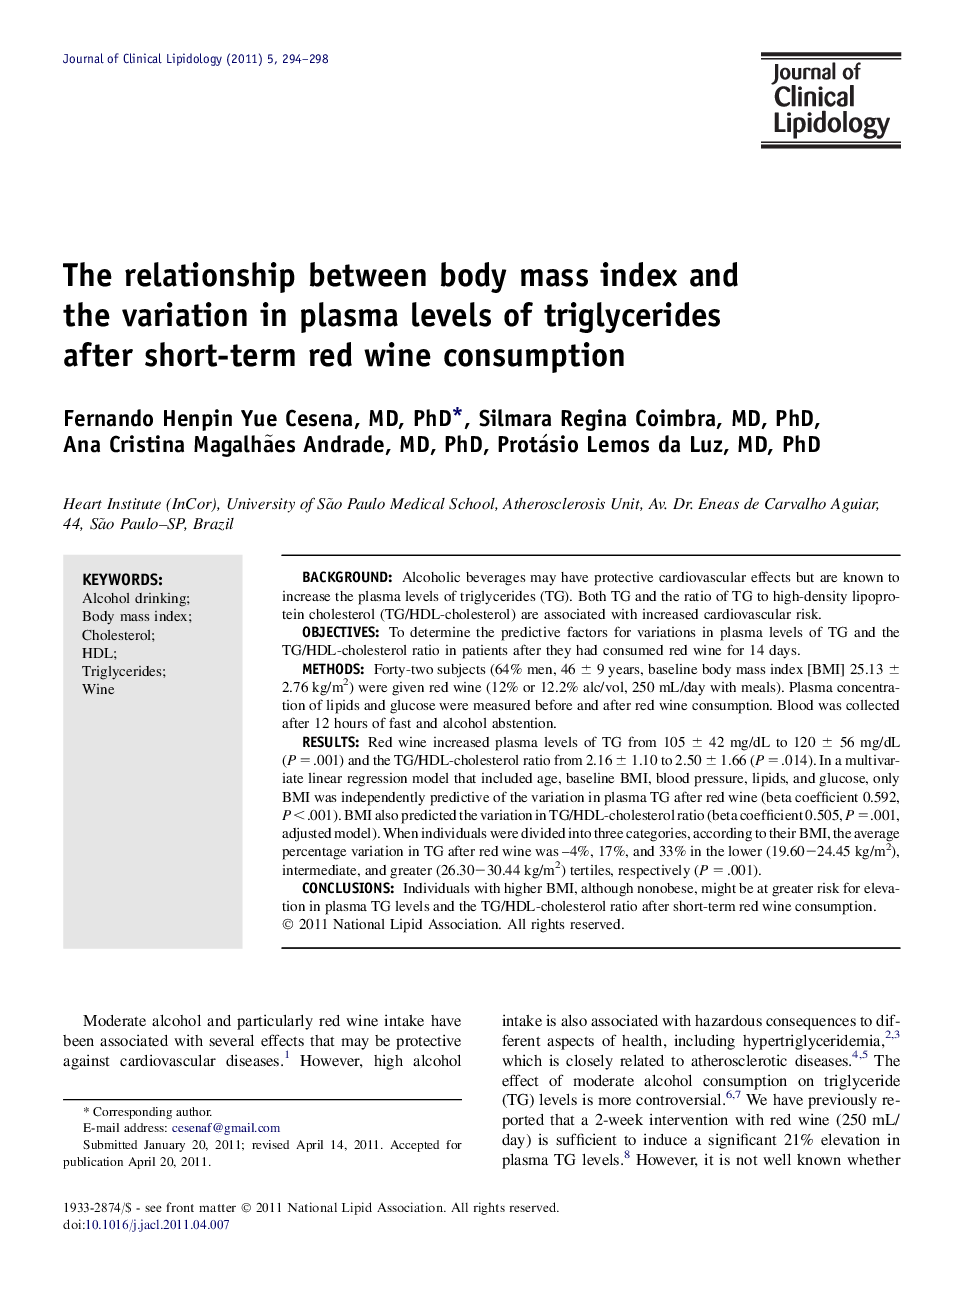 The relationship between body mass index and the variation in plasma levels of triglycerides after short-term red wine consumption